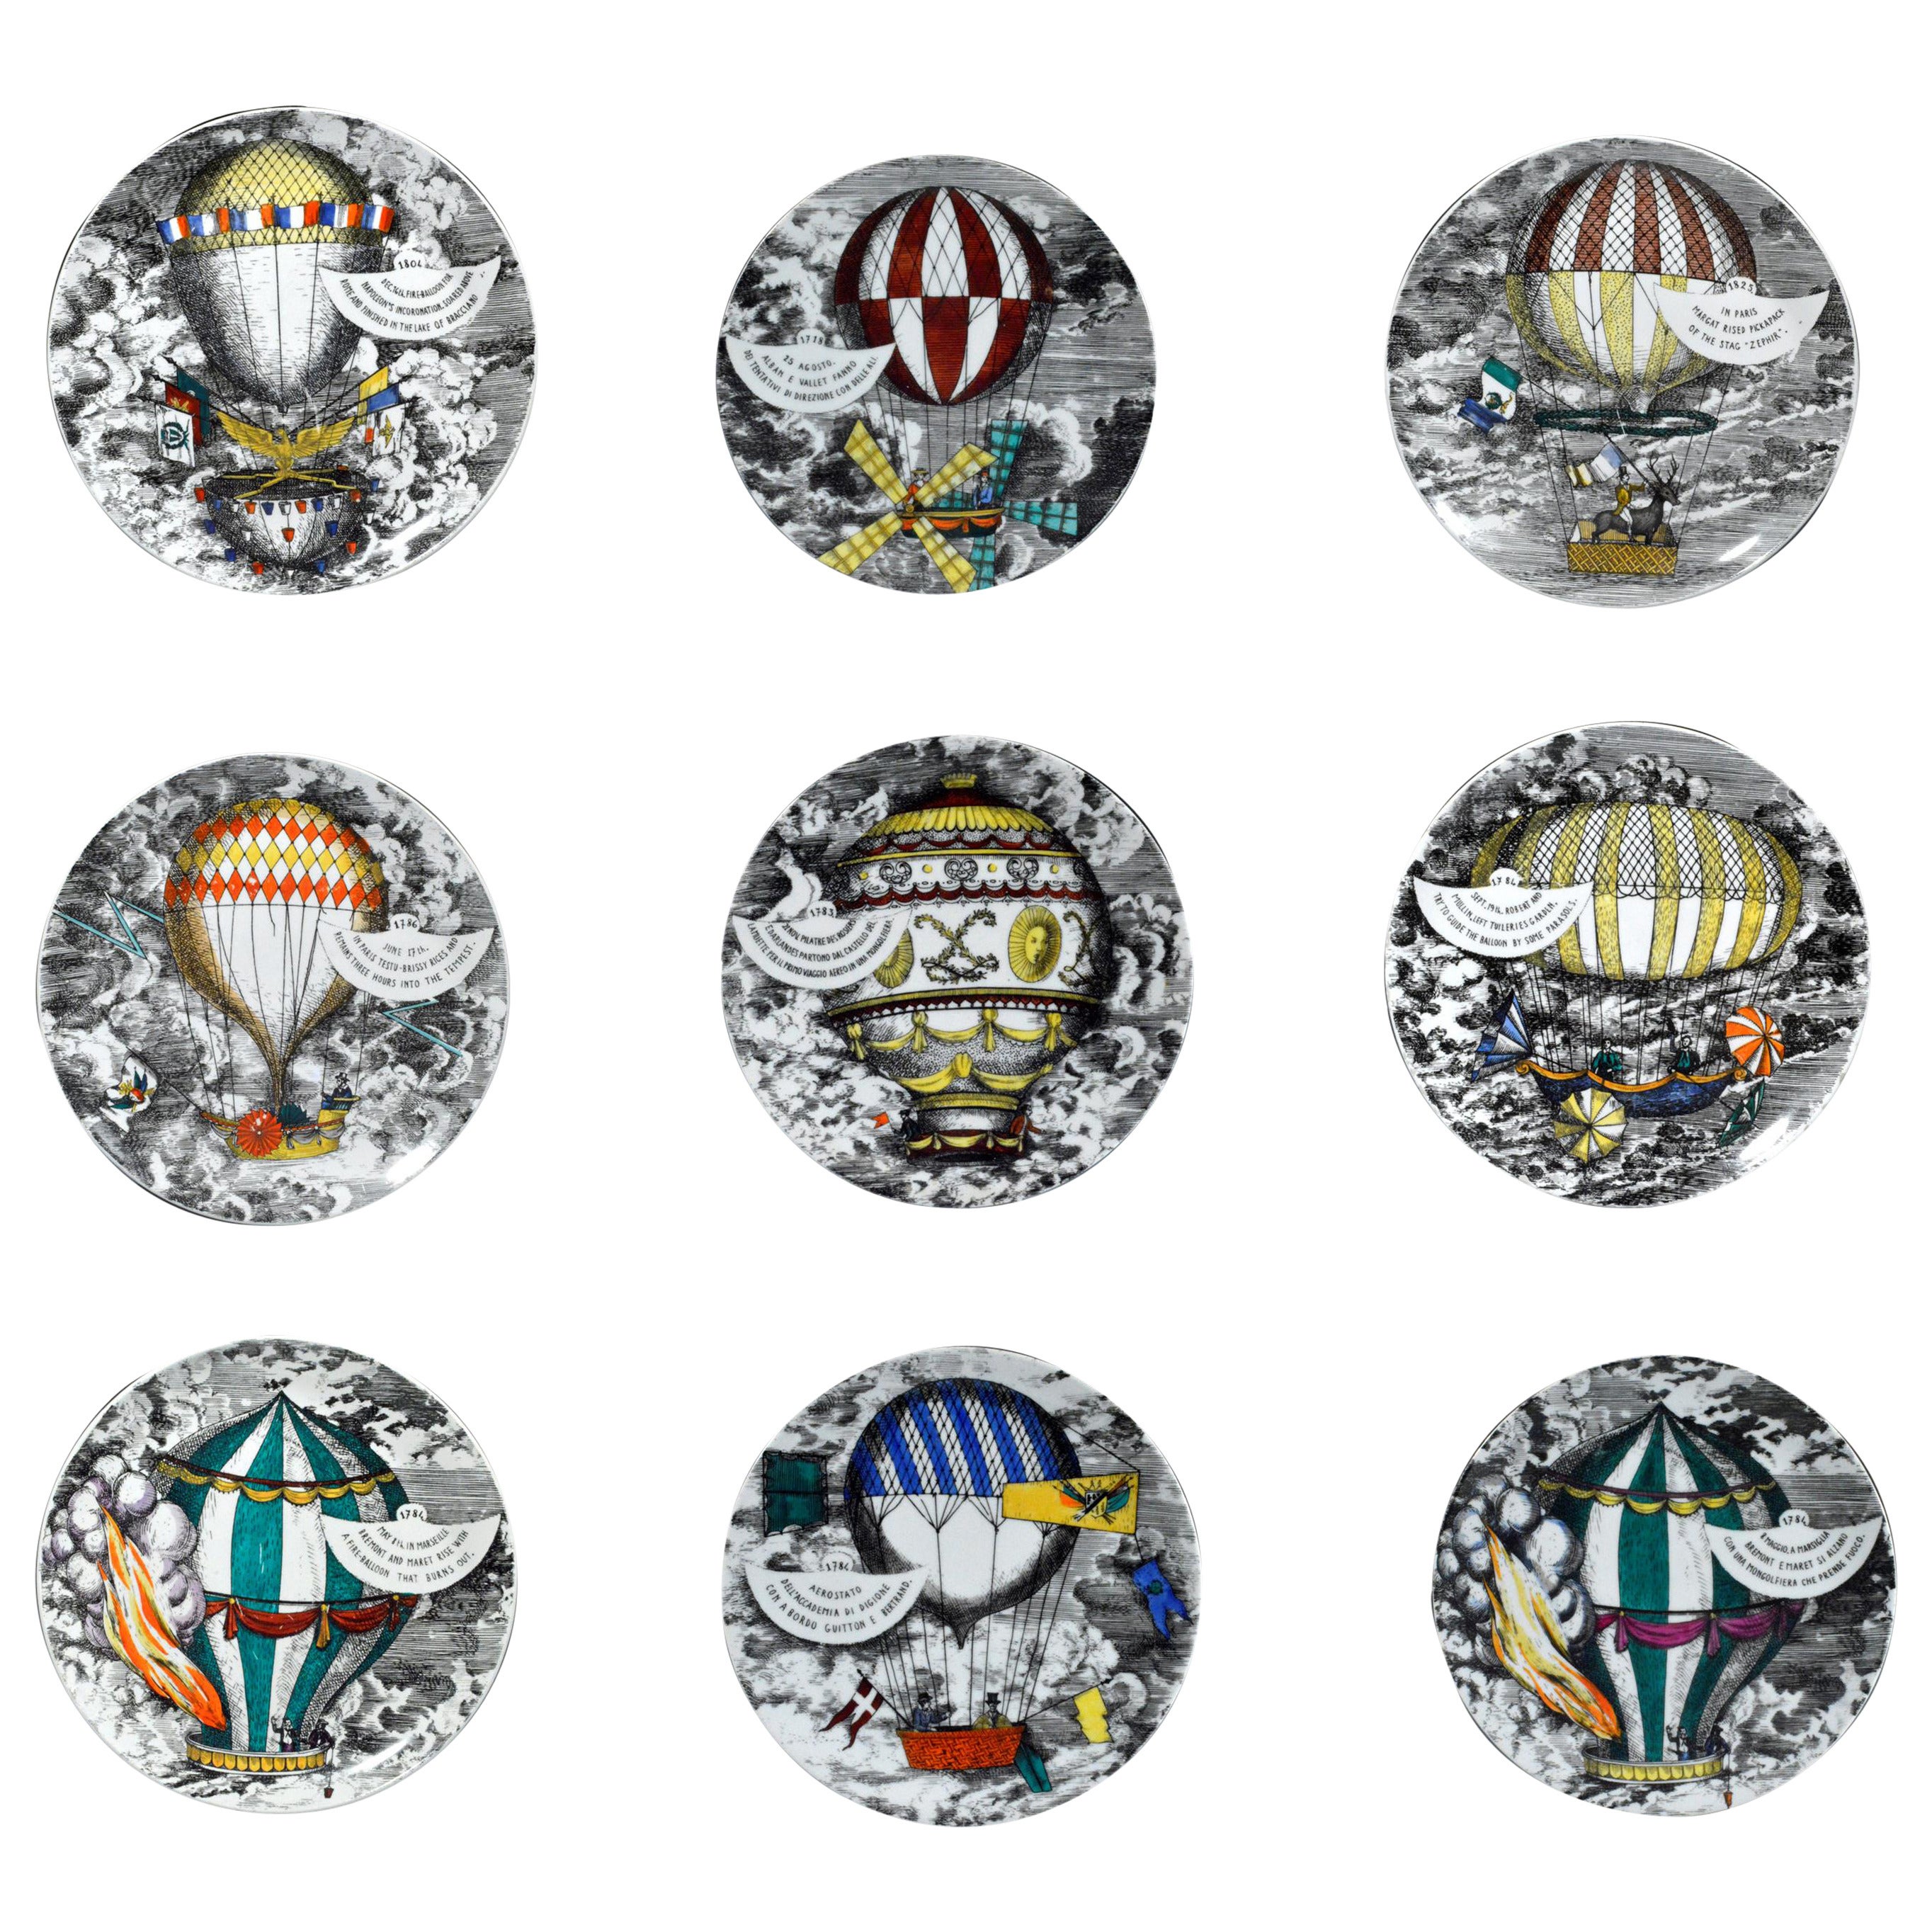 Piero Fornasetti Porcelain Plates with the Mongolfiere (Hot Air) Design